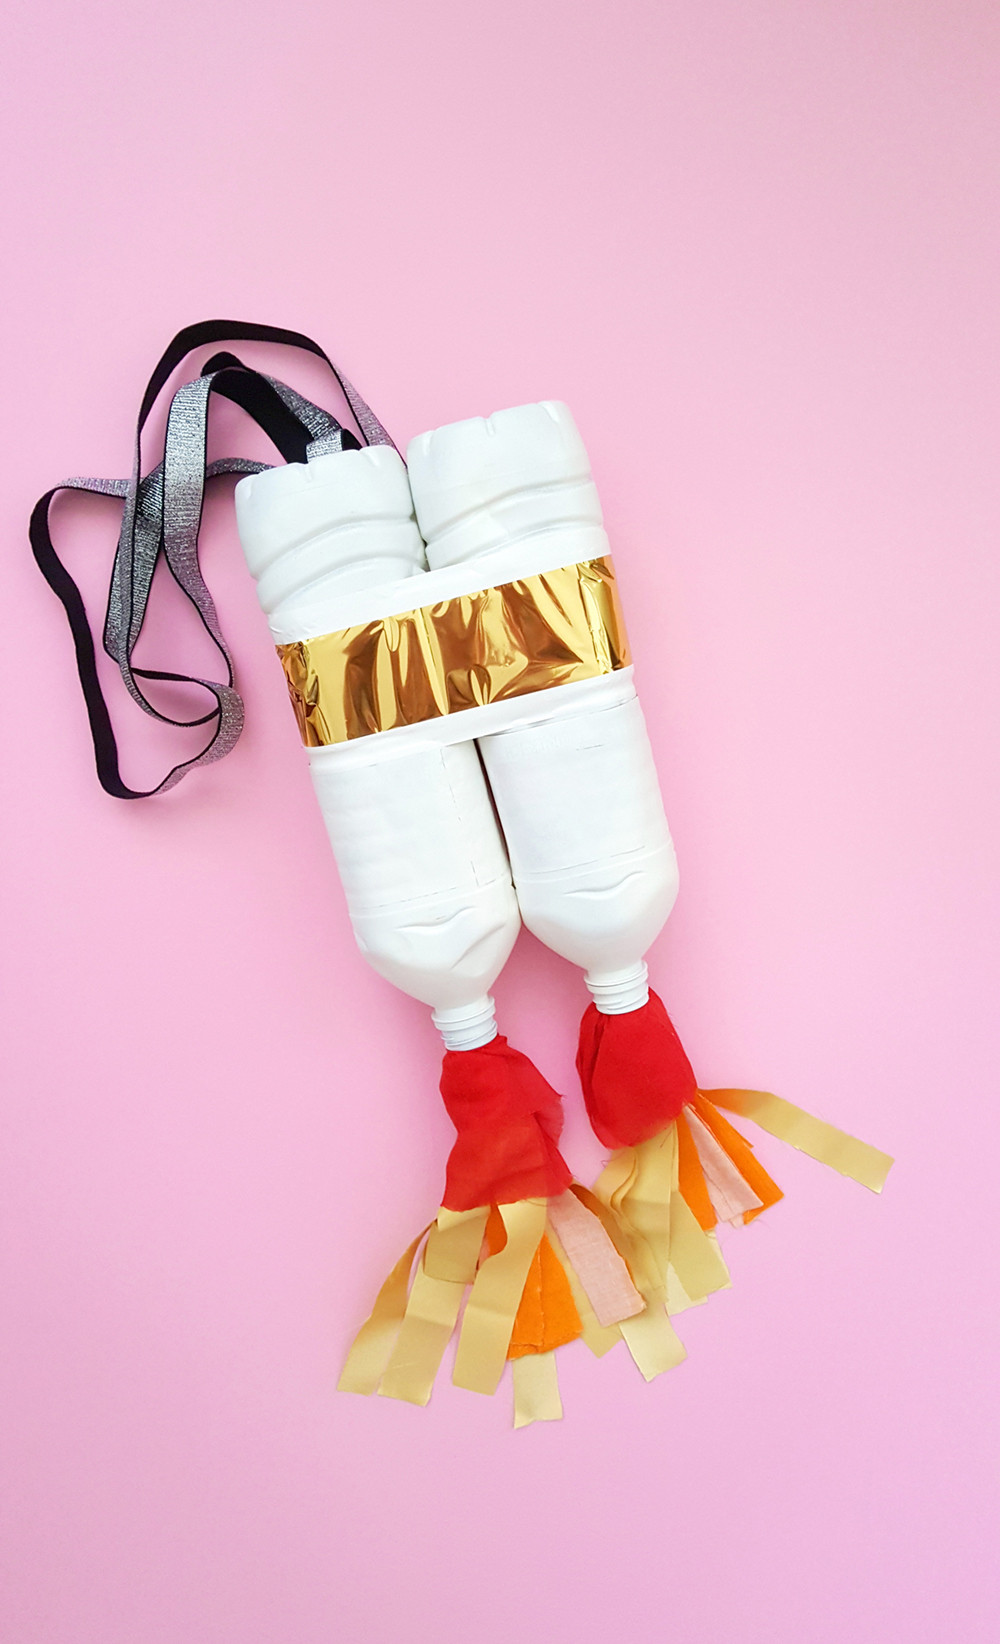 DIY Space Costume
 DIY Make Space Party Costumes Yourself via